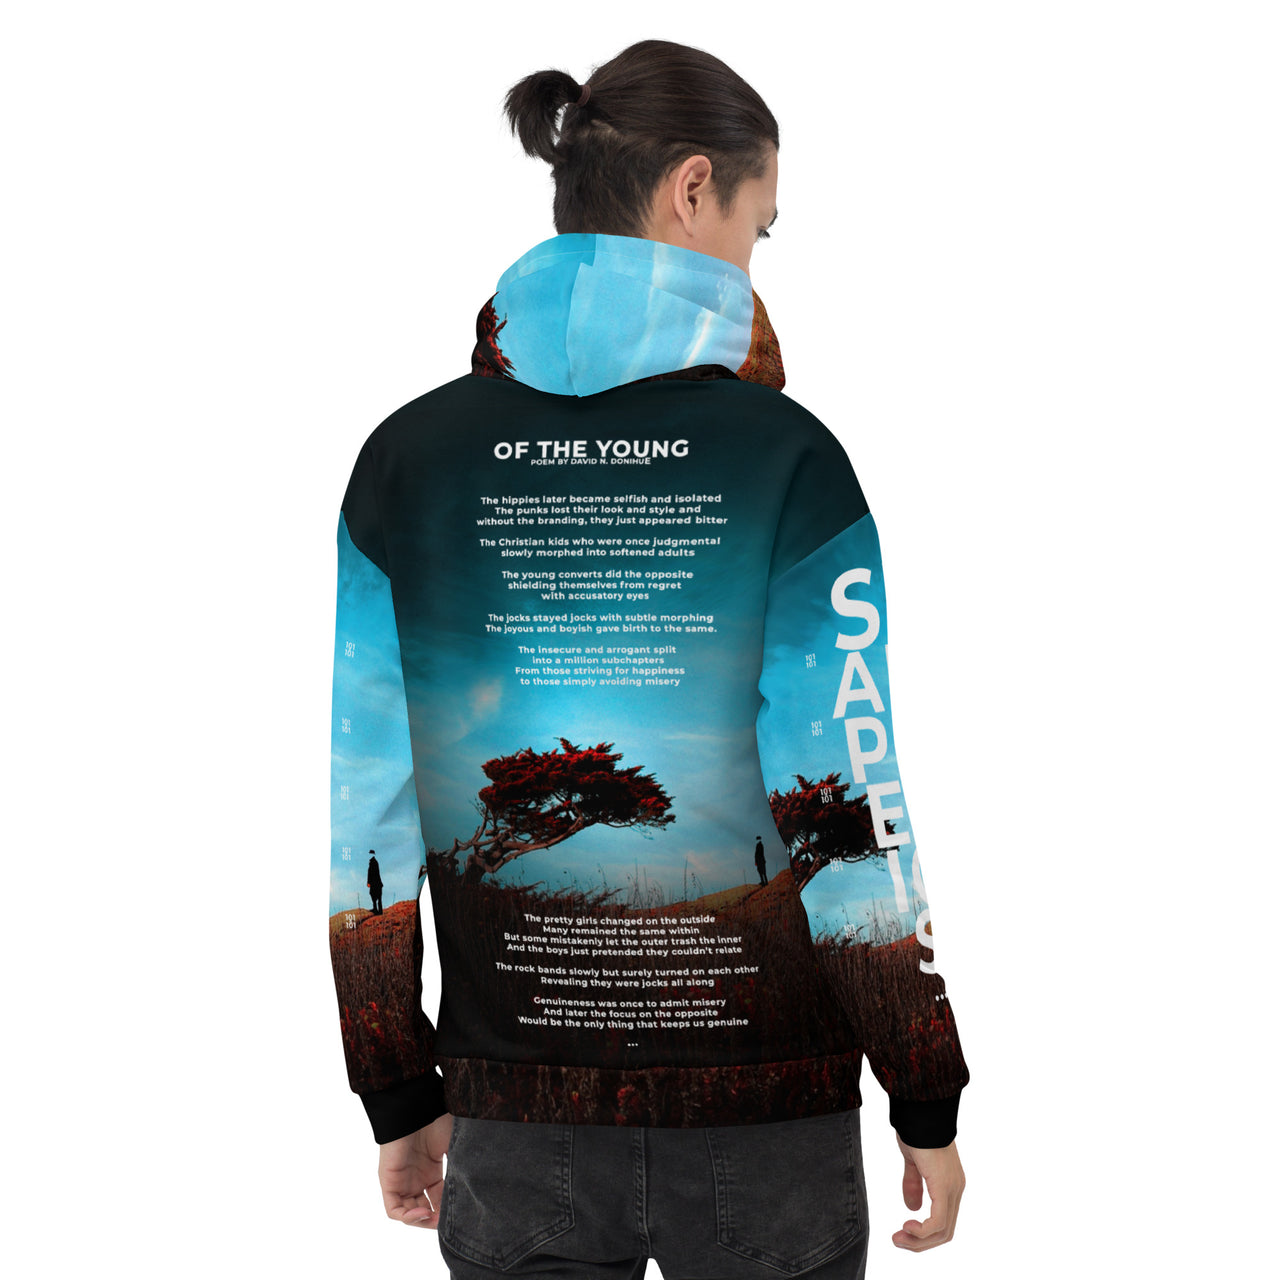 Unisex Hoodie "Of The Young" Poem by David N. Donihue